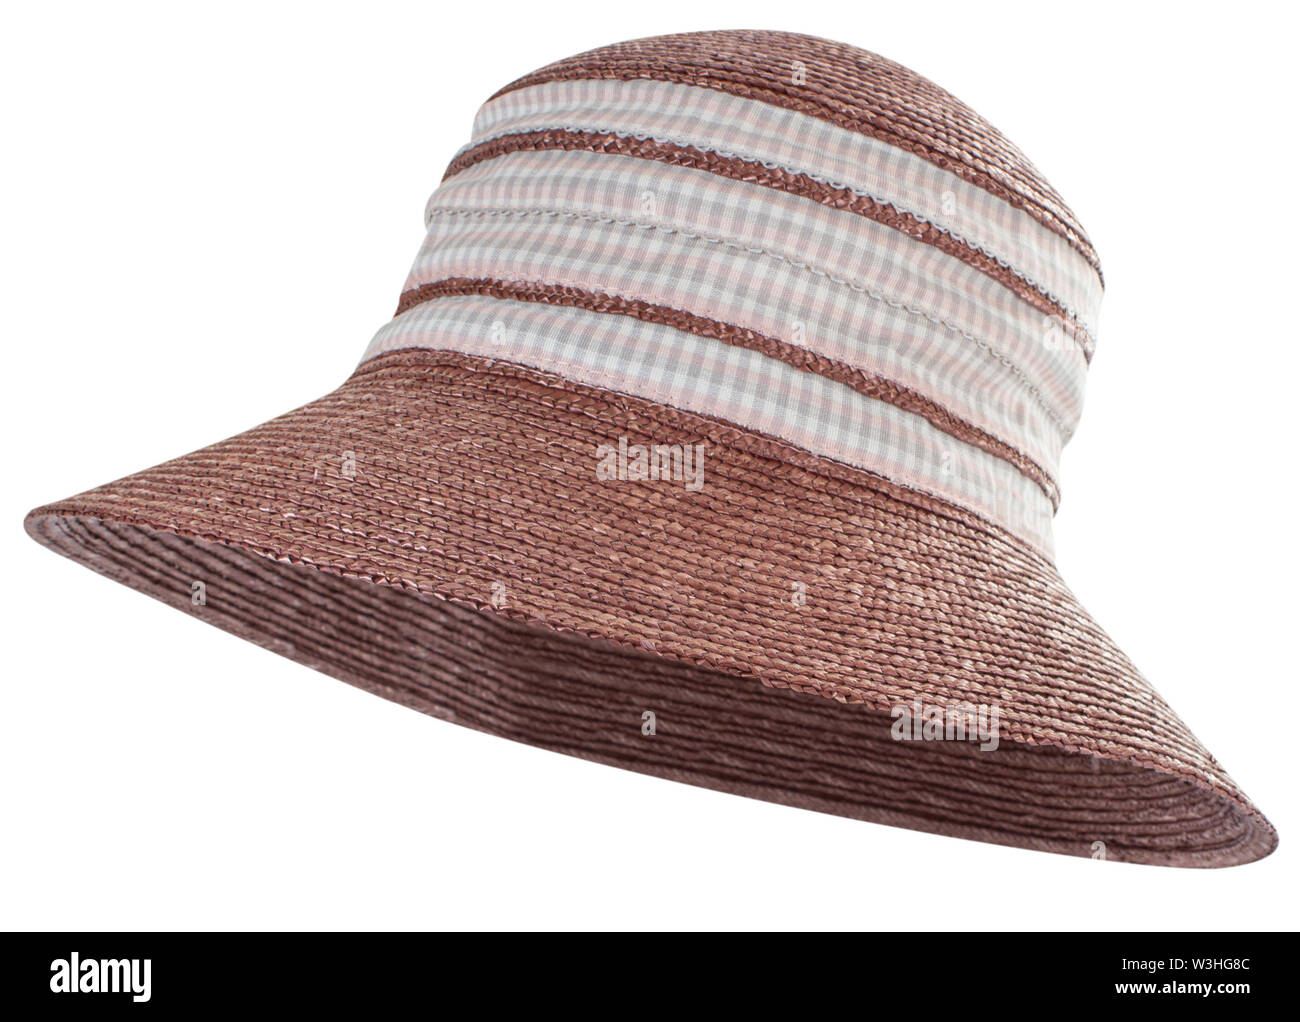 brown straw hat with checkered ribbon isolated on white background Stock Photo